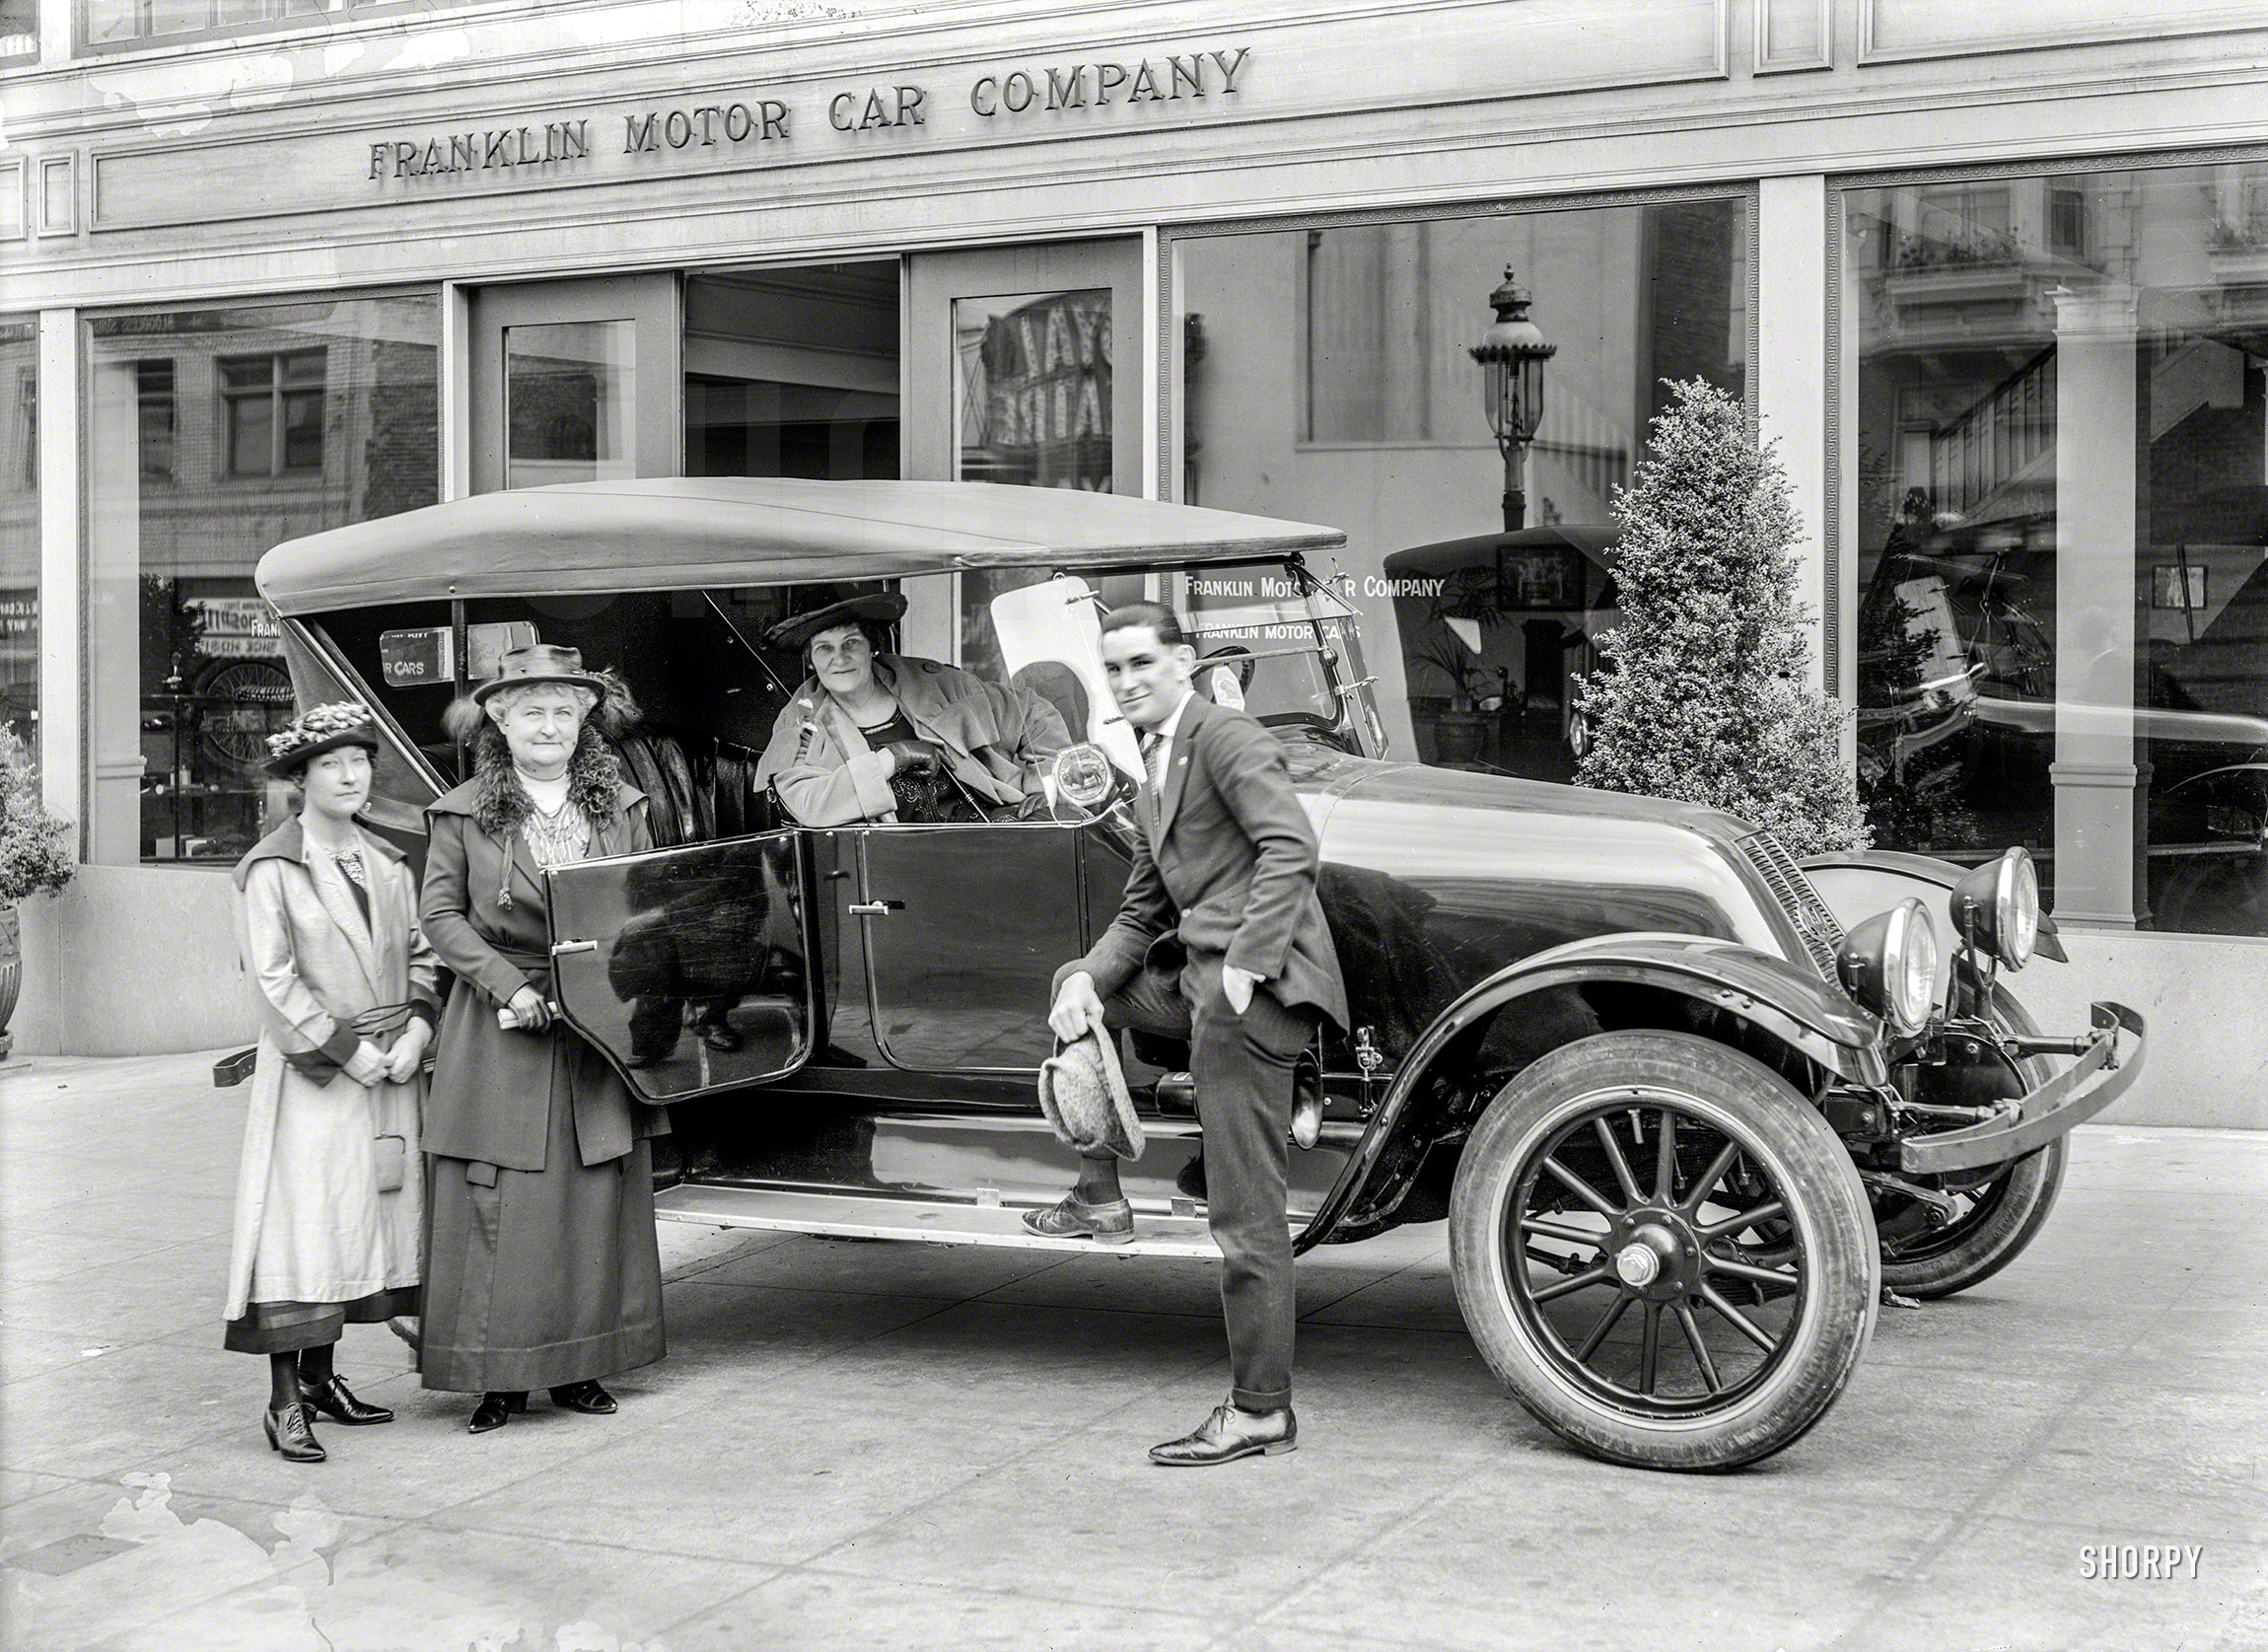 San Francisco circa 1920. "Franklin auto at Franklin Motor Car Co." Note the Yellowstone Park sticker. 5x7 glass negative by Christopher Helin. View full size.